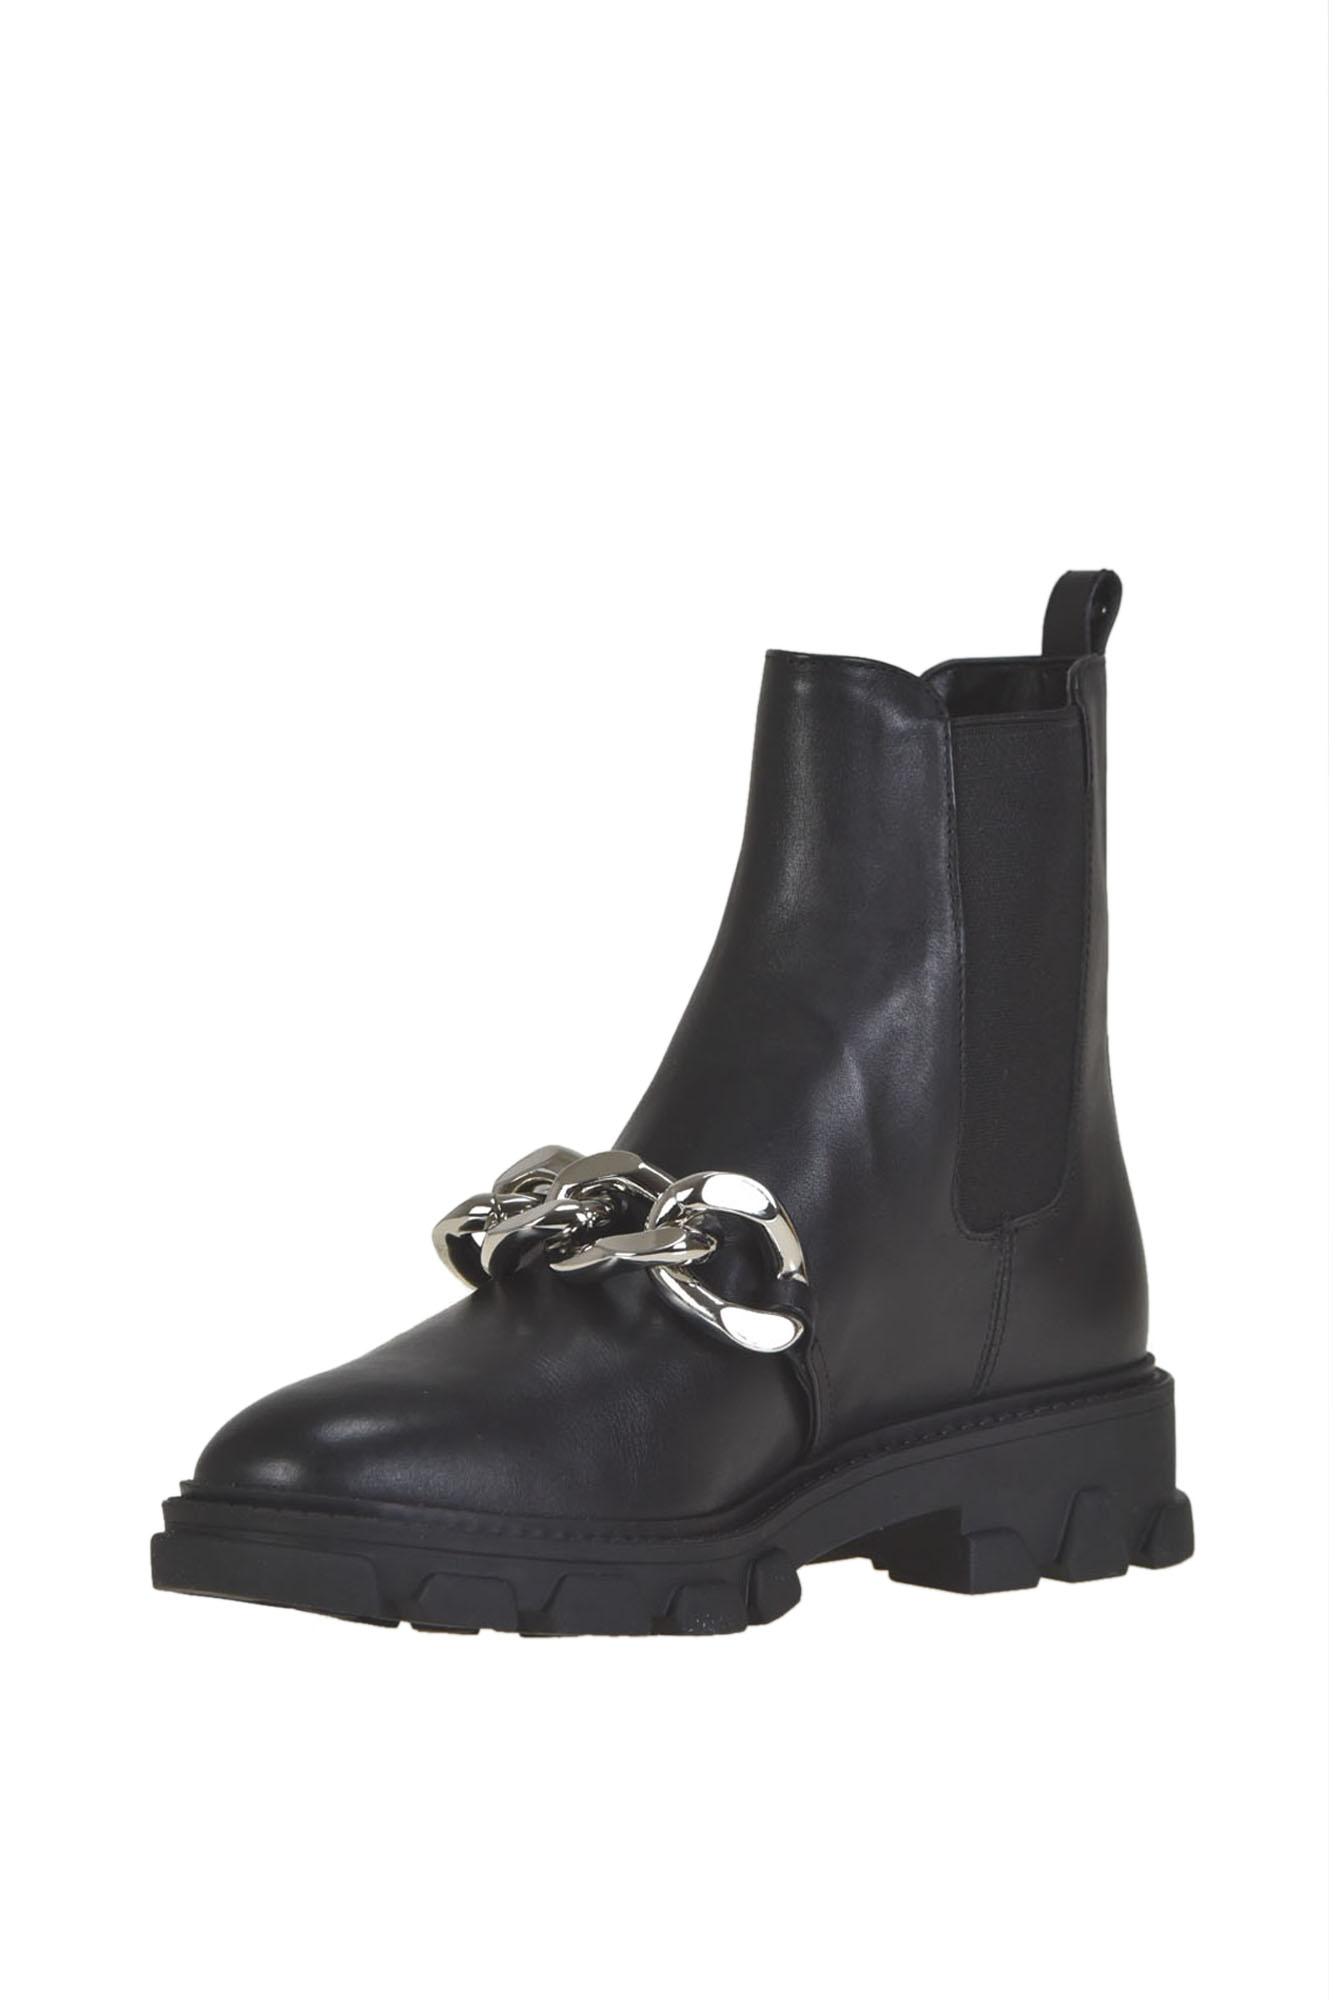 MICHAEL Michael Kors Scarlett Beatles Ankle Boots With Metal Chain in Black  | Lyst